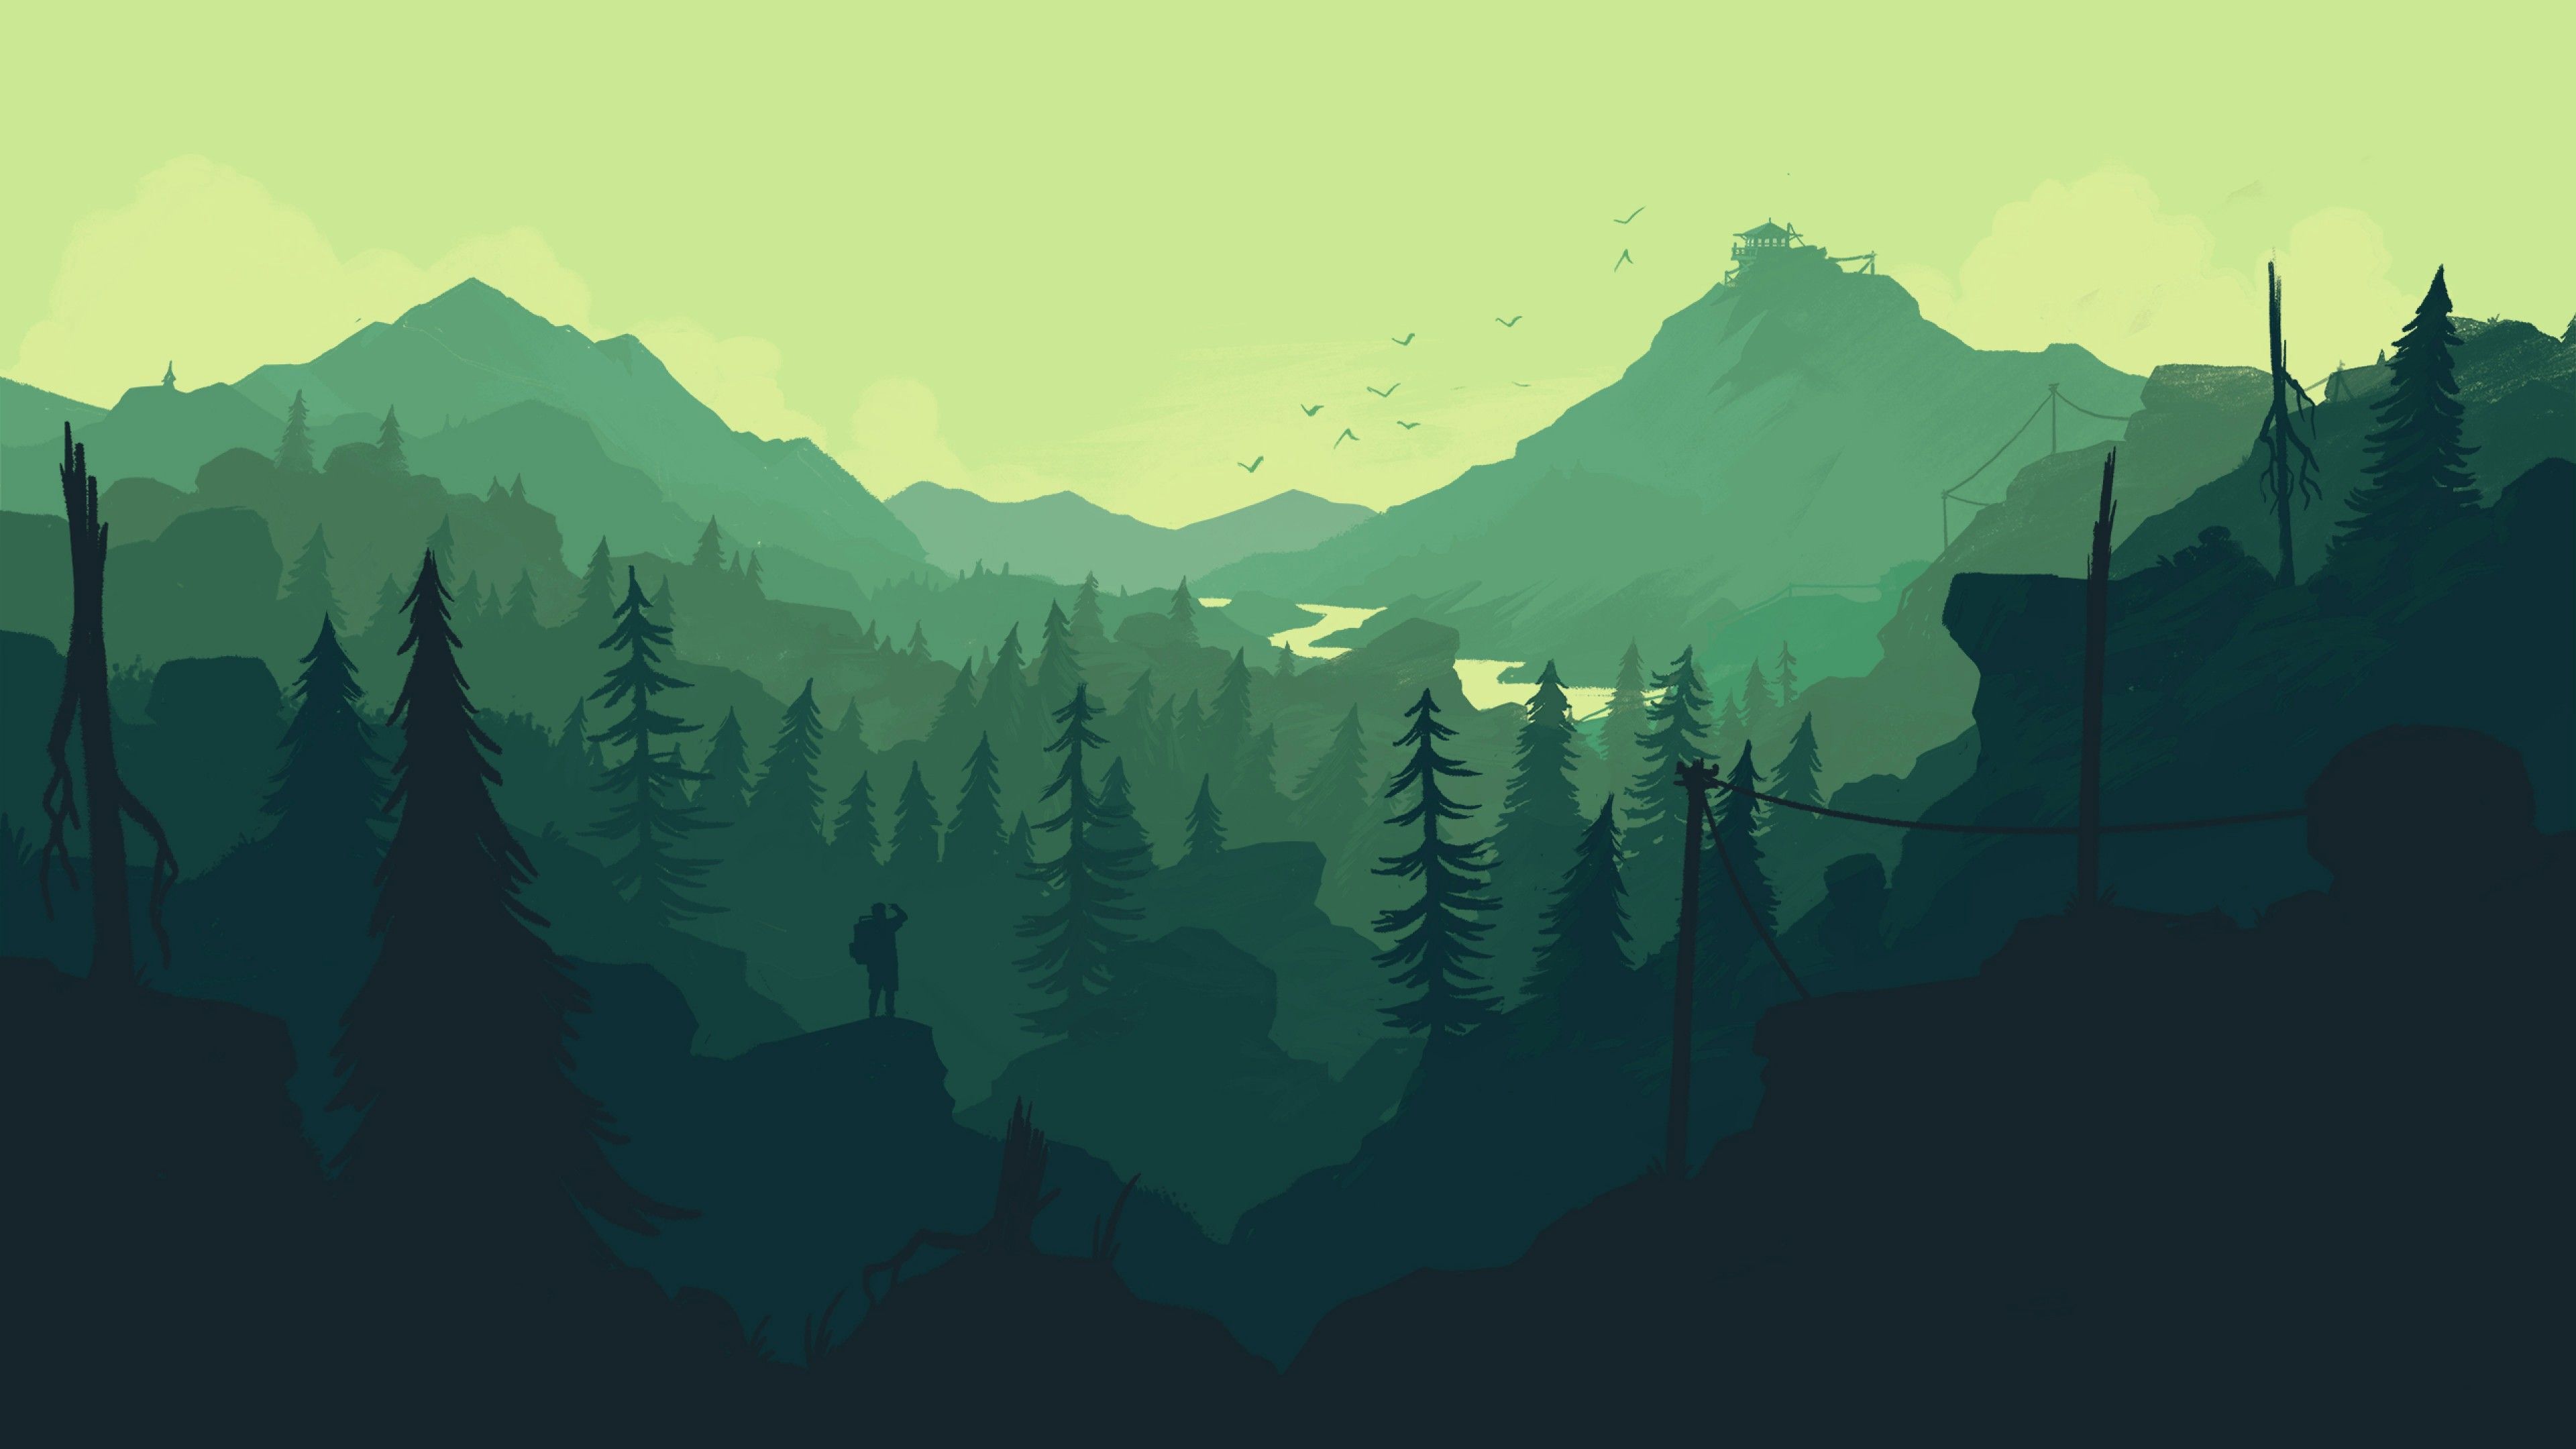 GREEN THEMED MINIMALIST WALLPAPERS FOR .com